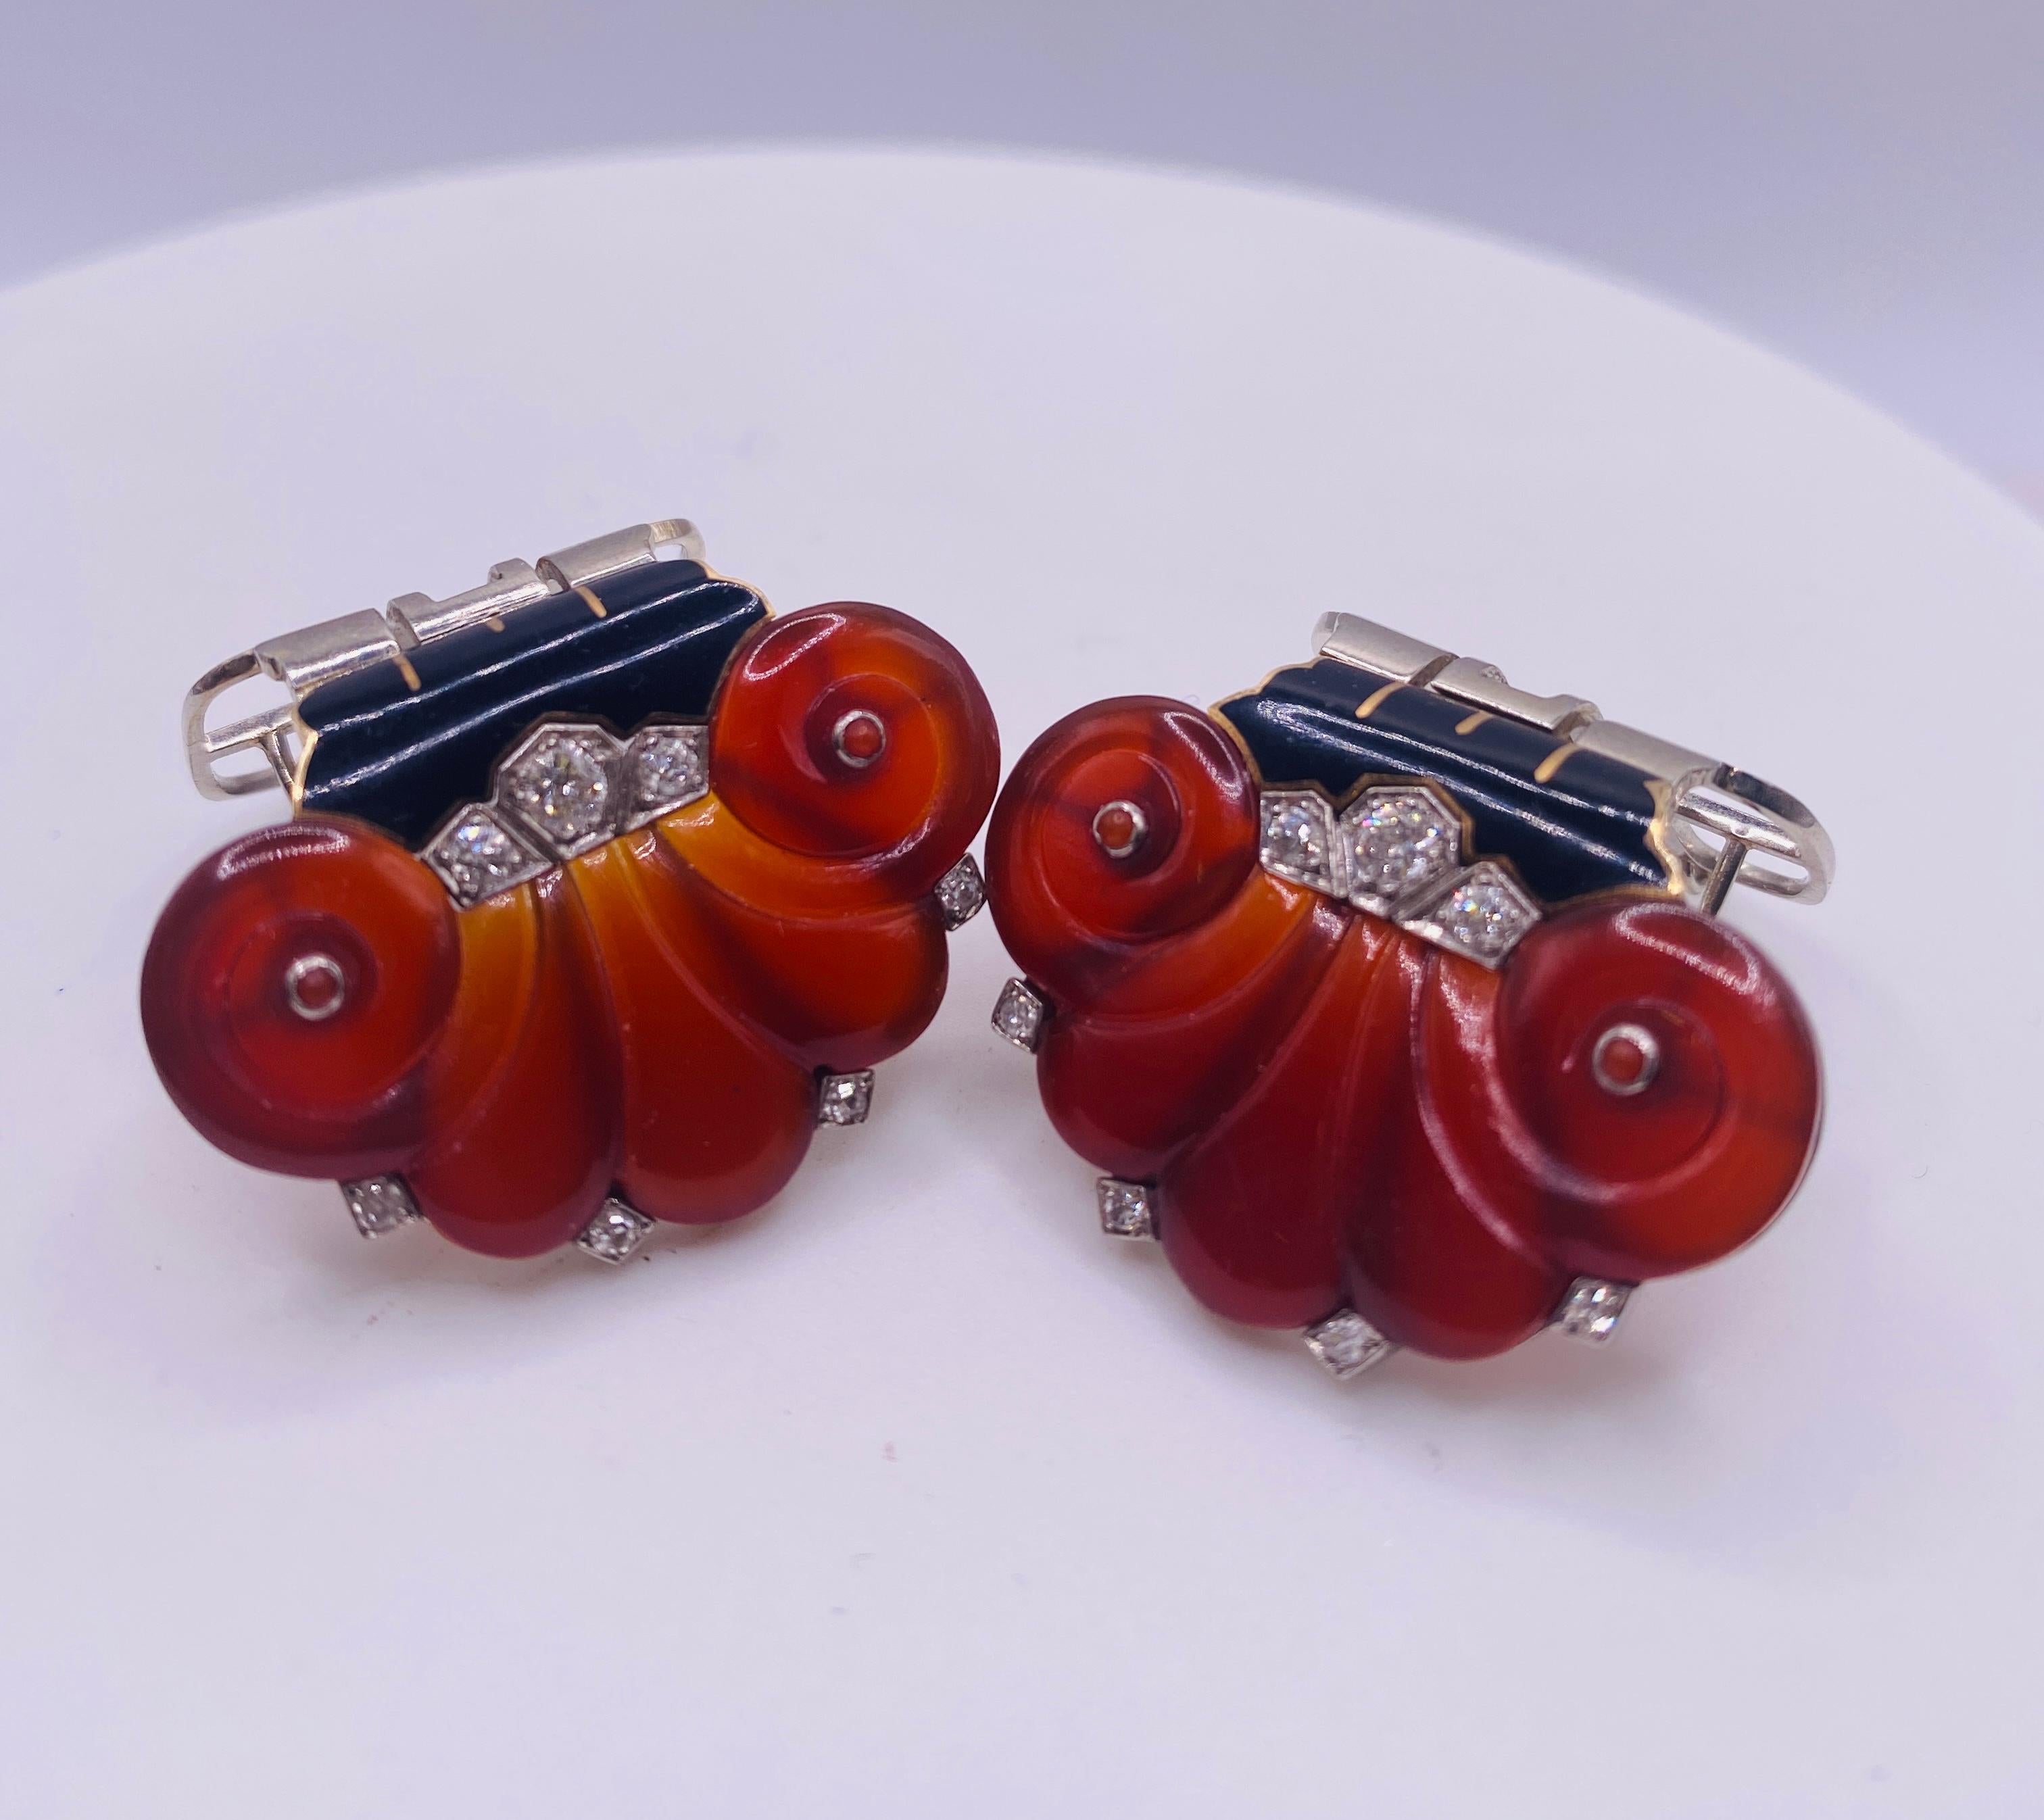 Cartier New York carved carnelian diamond cabochon coral clip brooch circa 1940's. Clearly marked CARTIER on both clips.  7.1Dwt